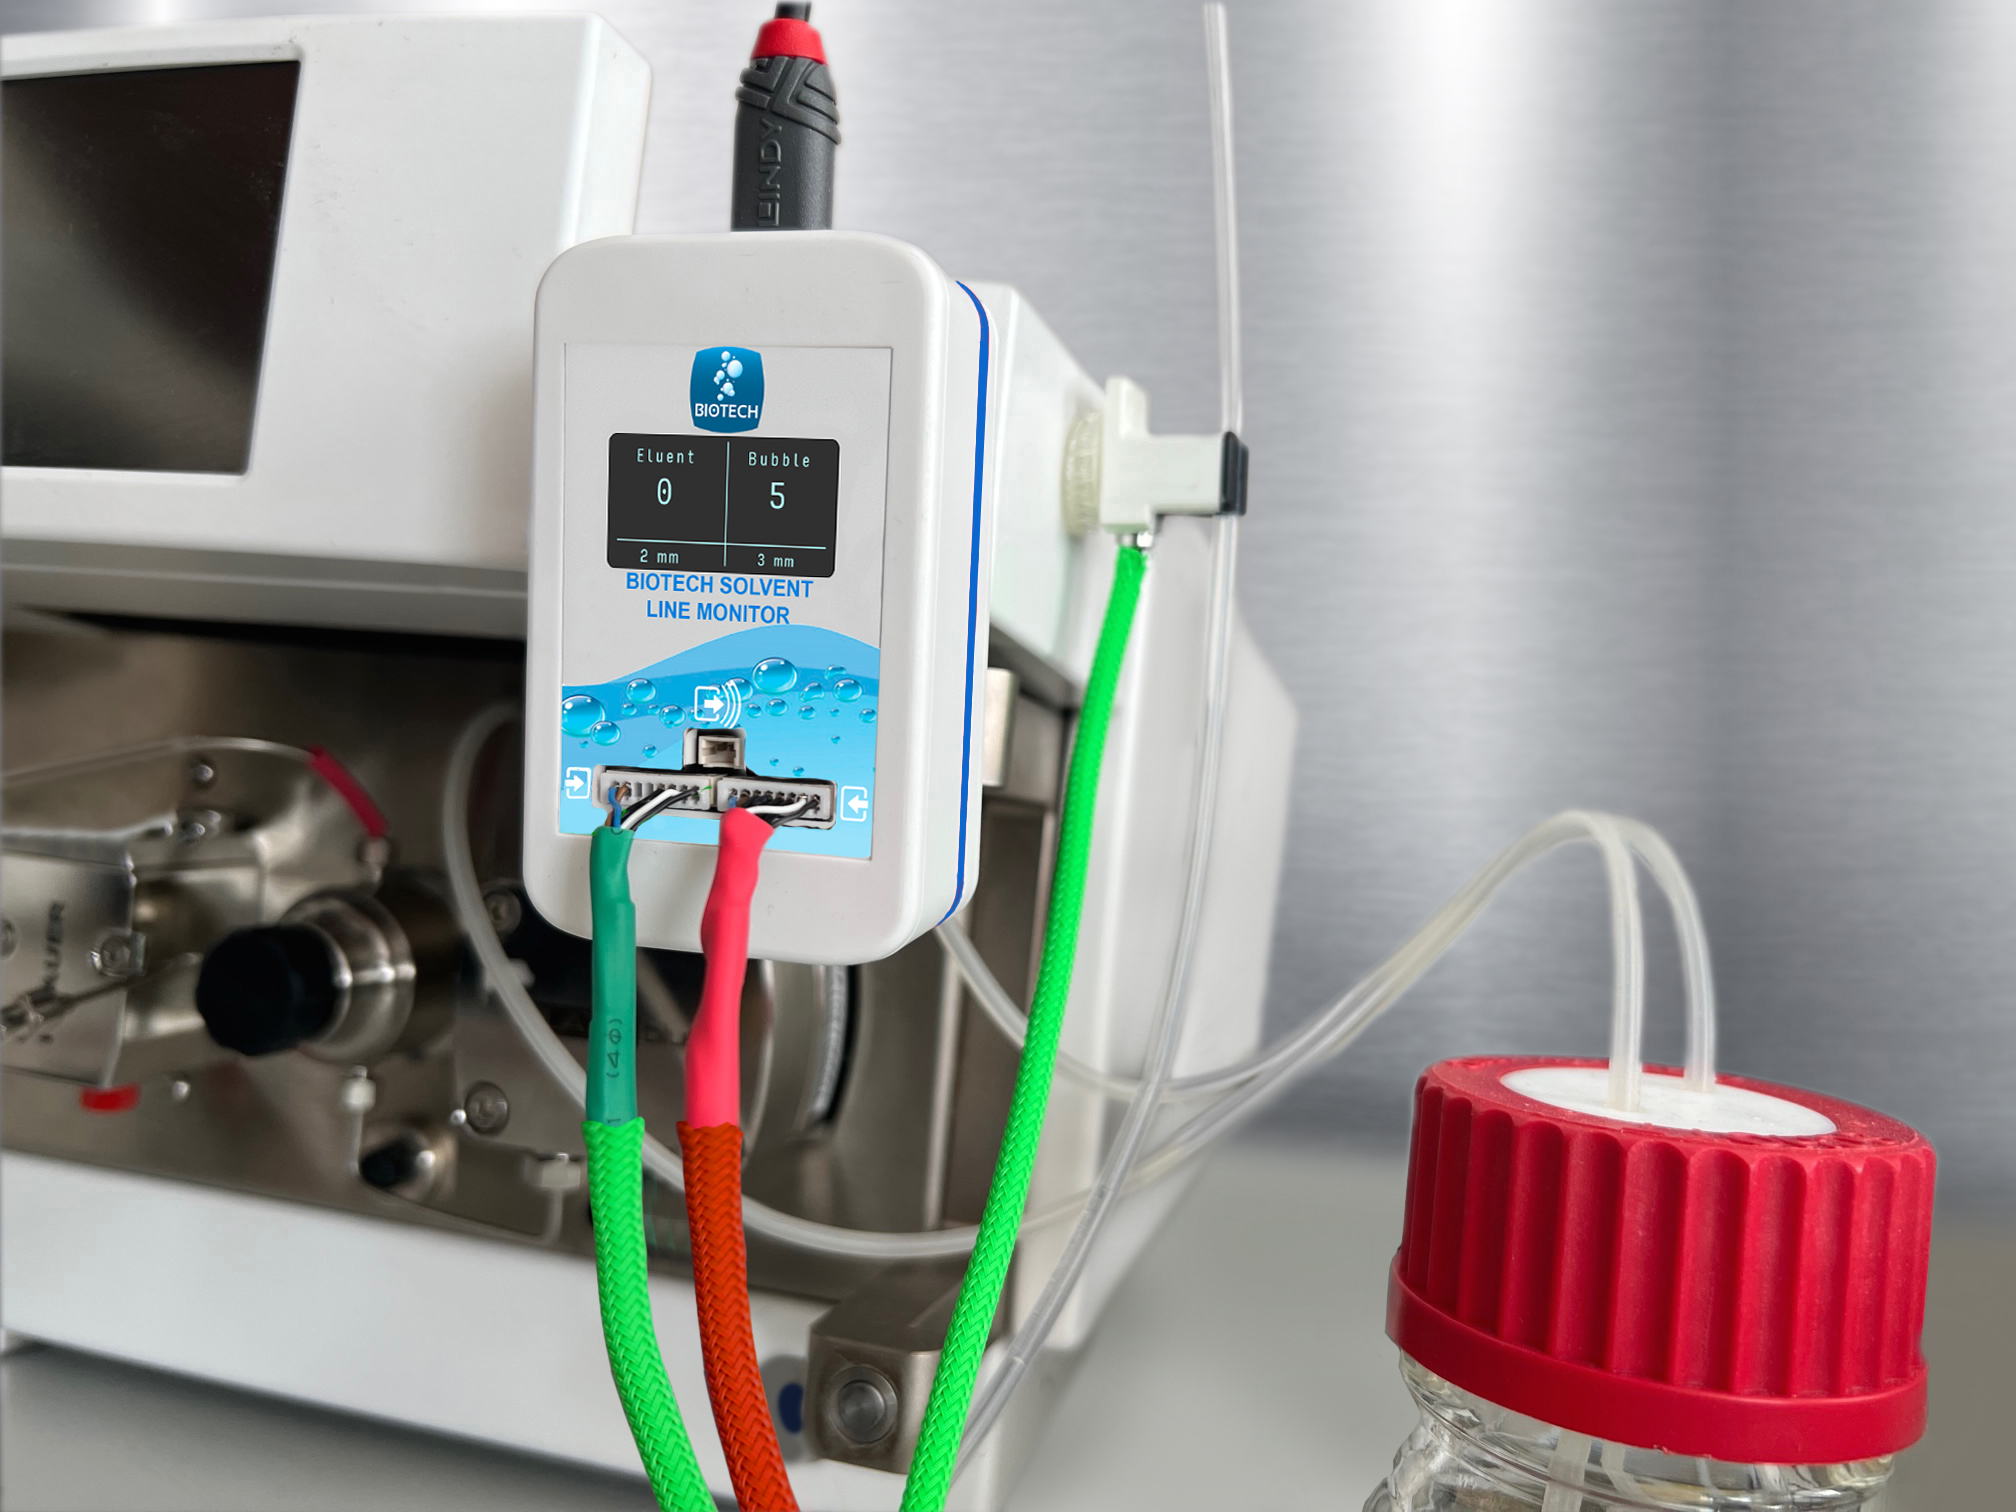 Biotech Solvent Line Monitor with optical sensors